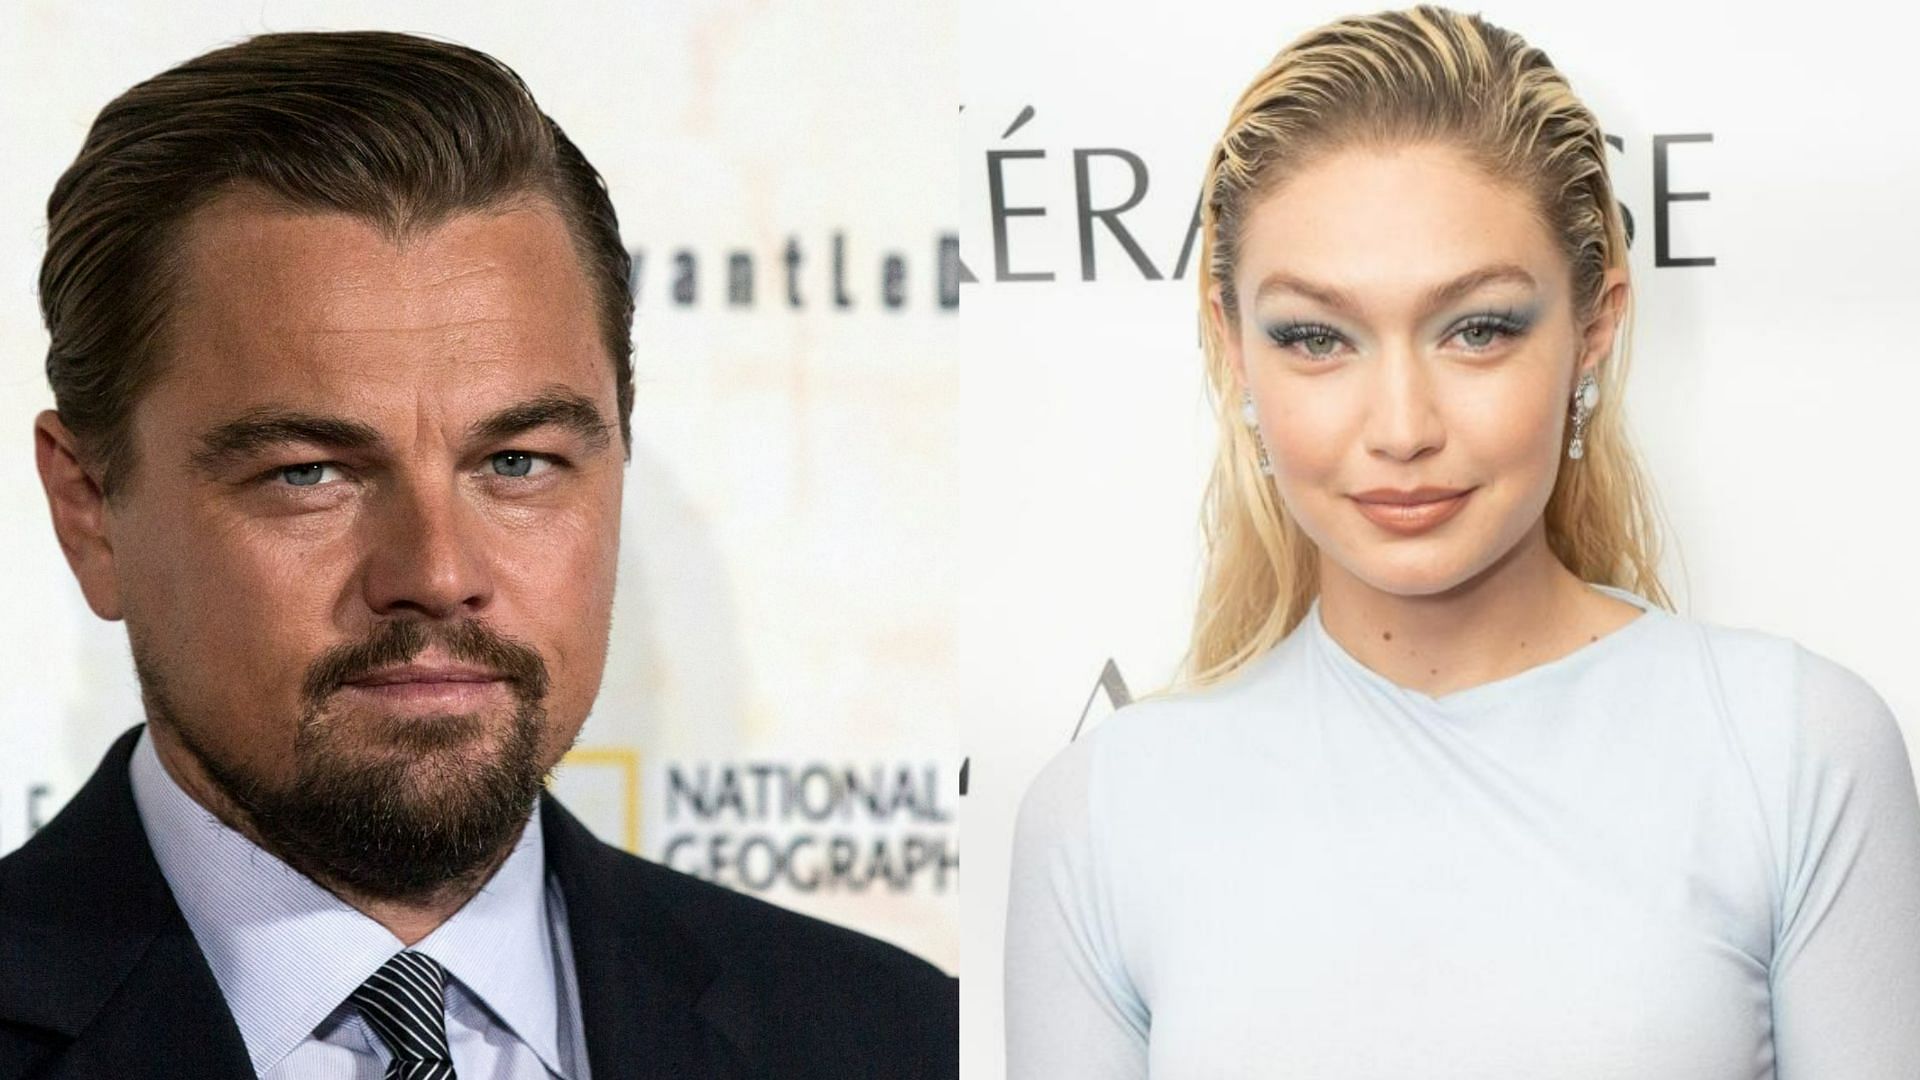 Leonardo DiCaprio and Gigi Hadid spotted getting cozy in Soho loft after-party (Images via Getty Images)